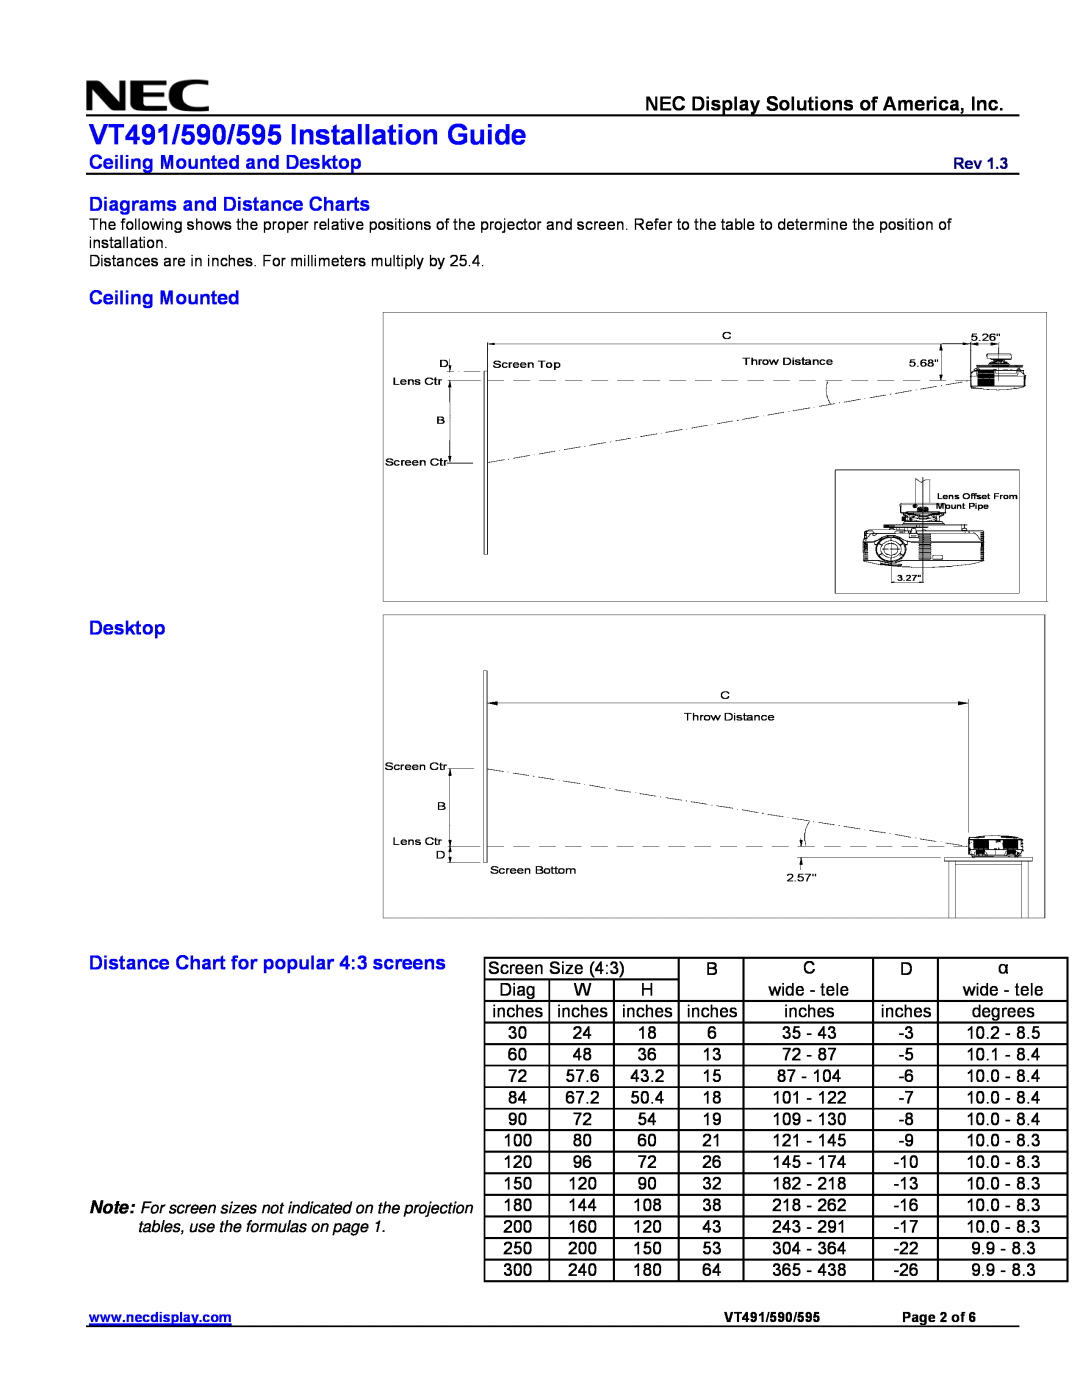 NEC VT491 specifications NEC Display Solutions of America, Inc, Diagrams and Distance Charts, Ceiling Mounted Desktop 